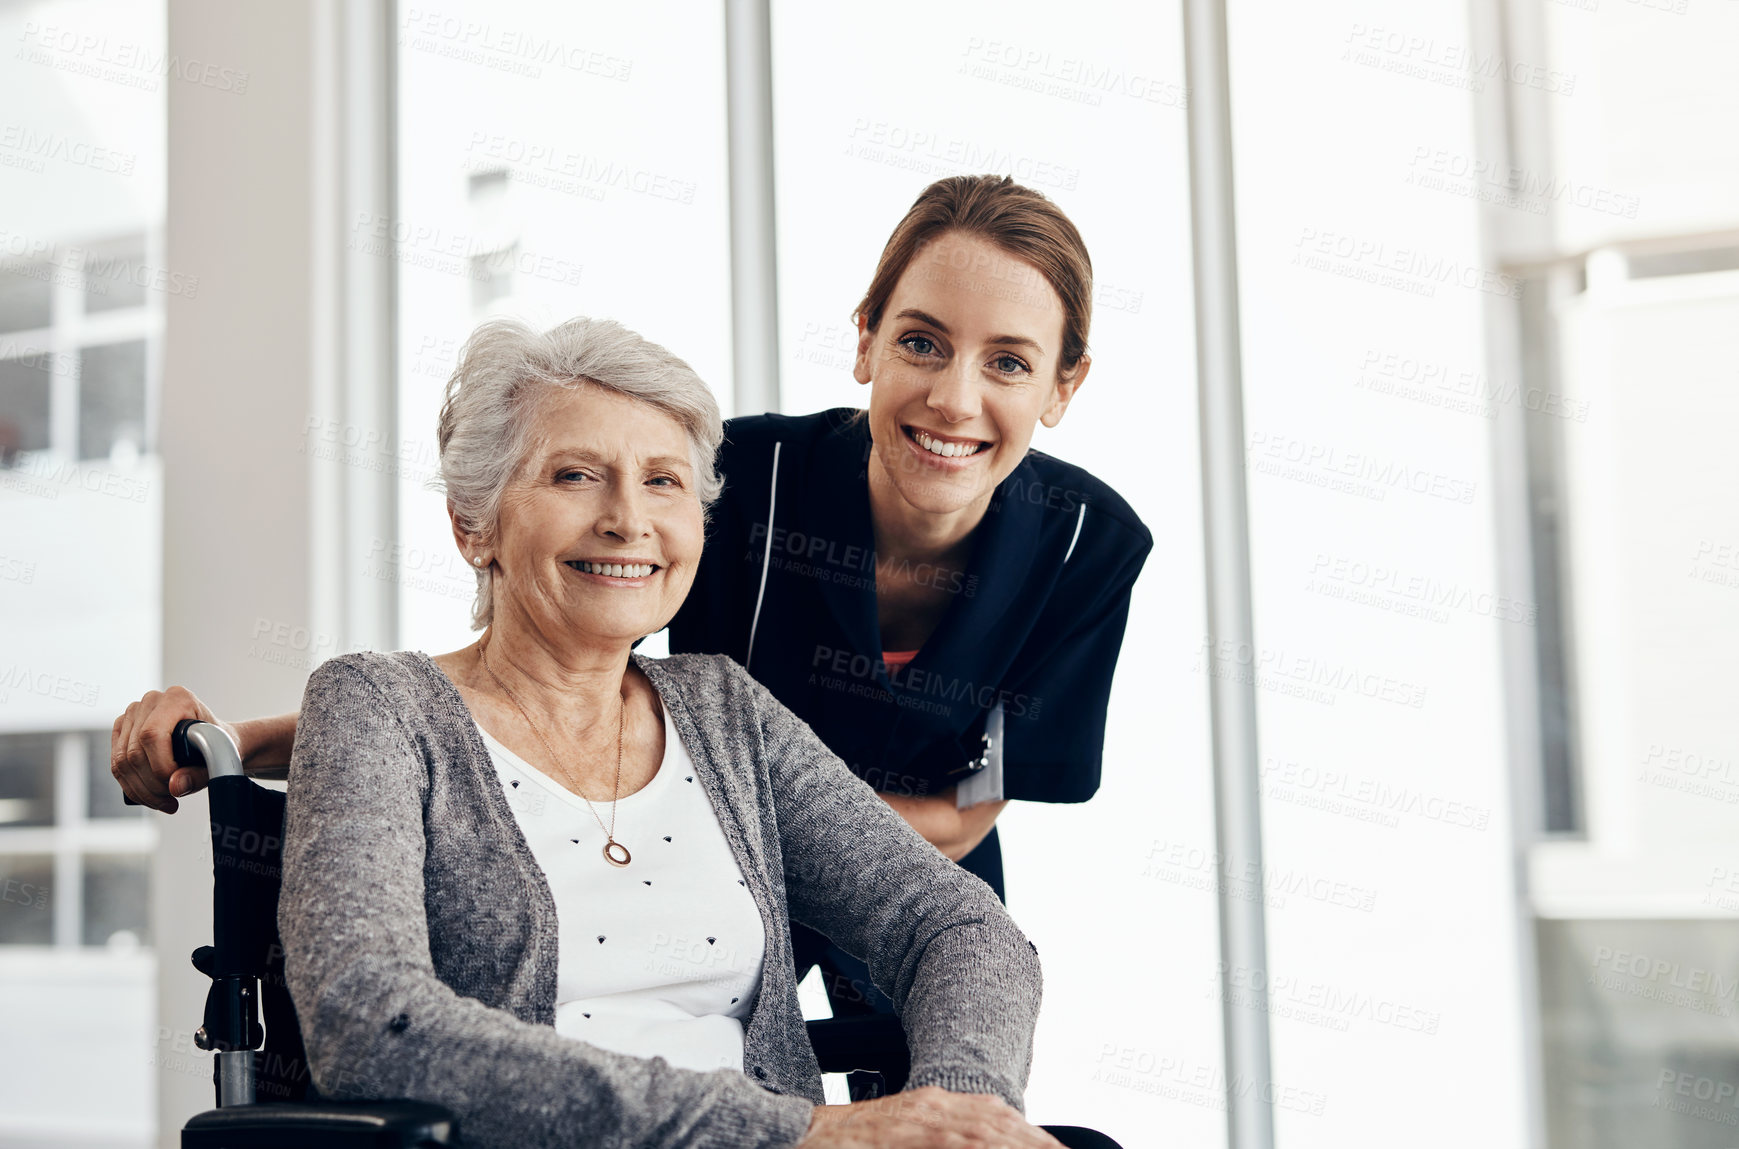 Buy stock photo Cropped shot of a female nurse caring for a senior woman in a wheelchair